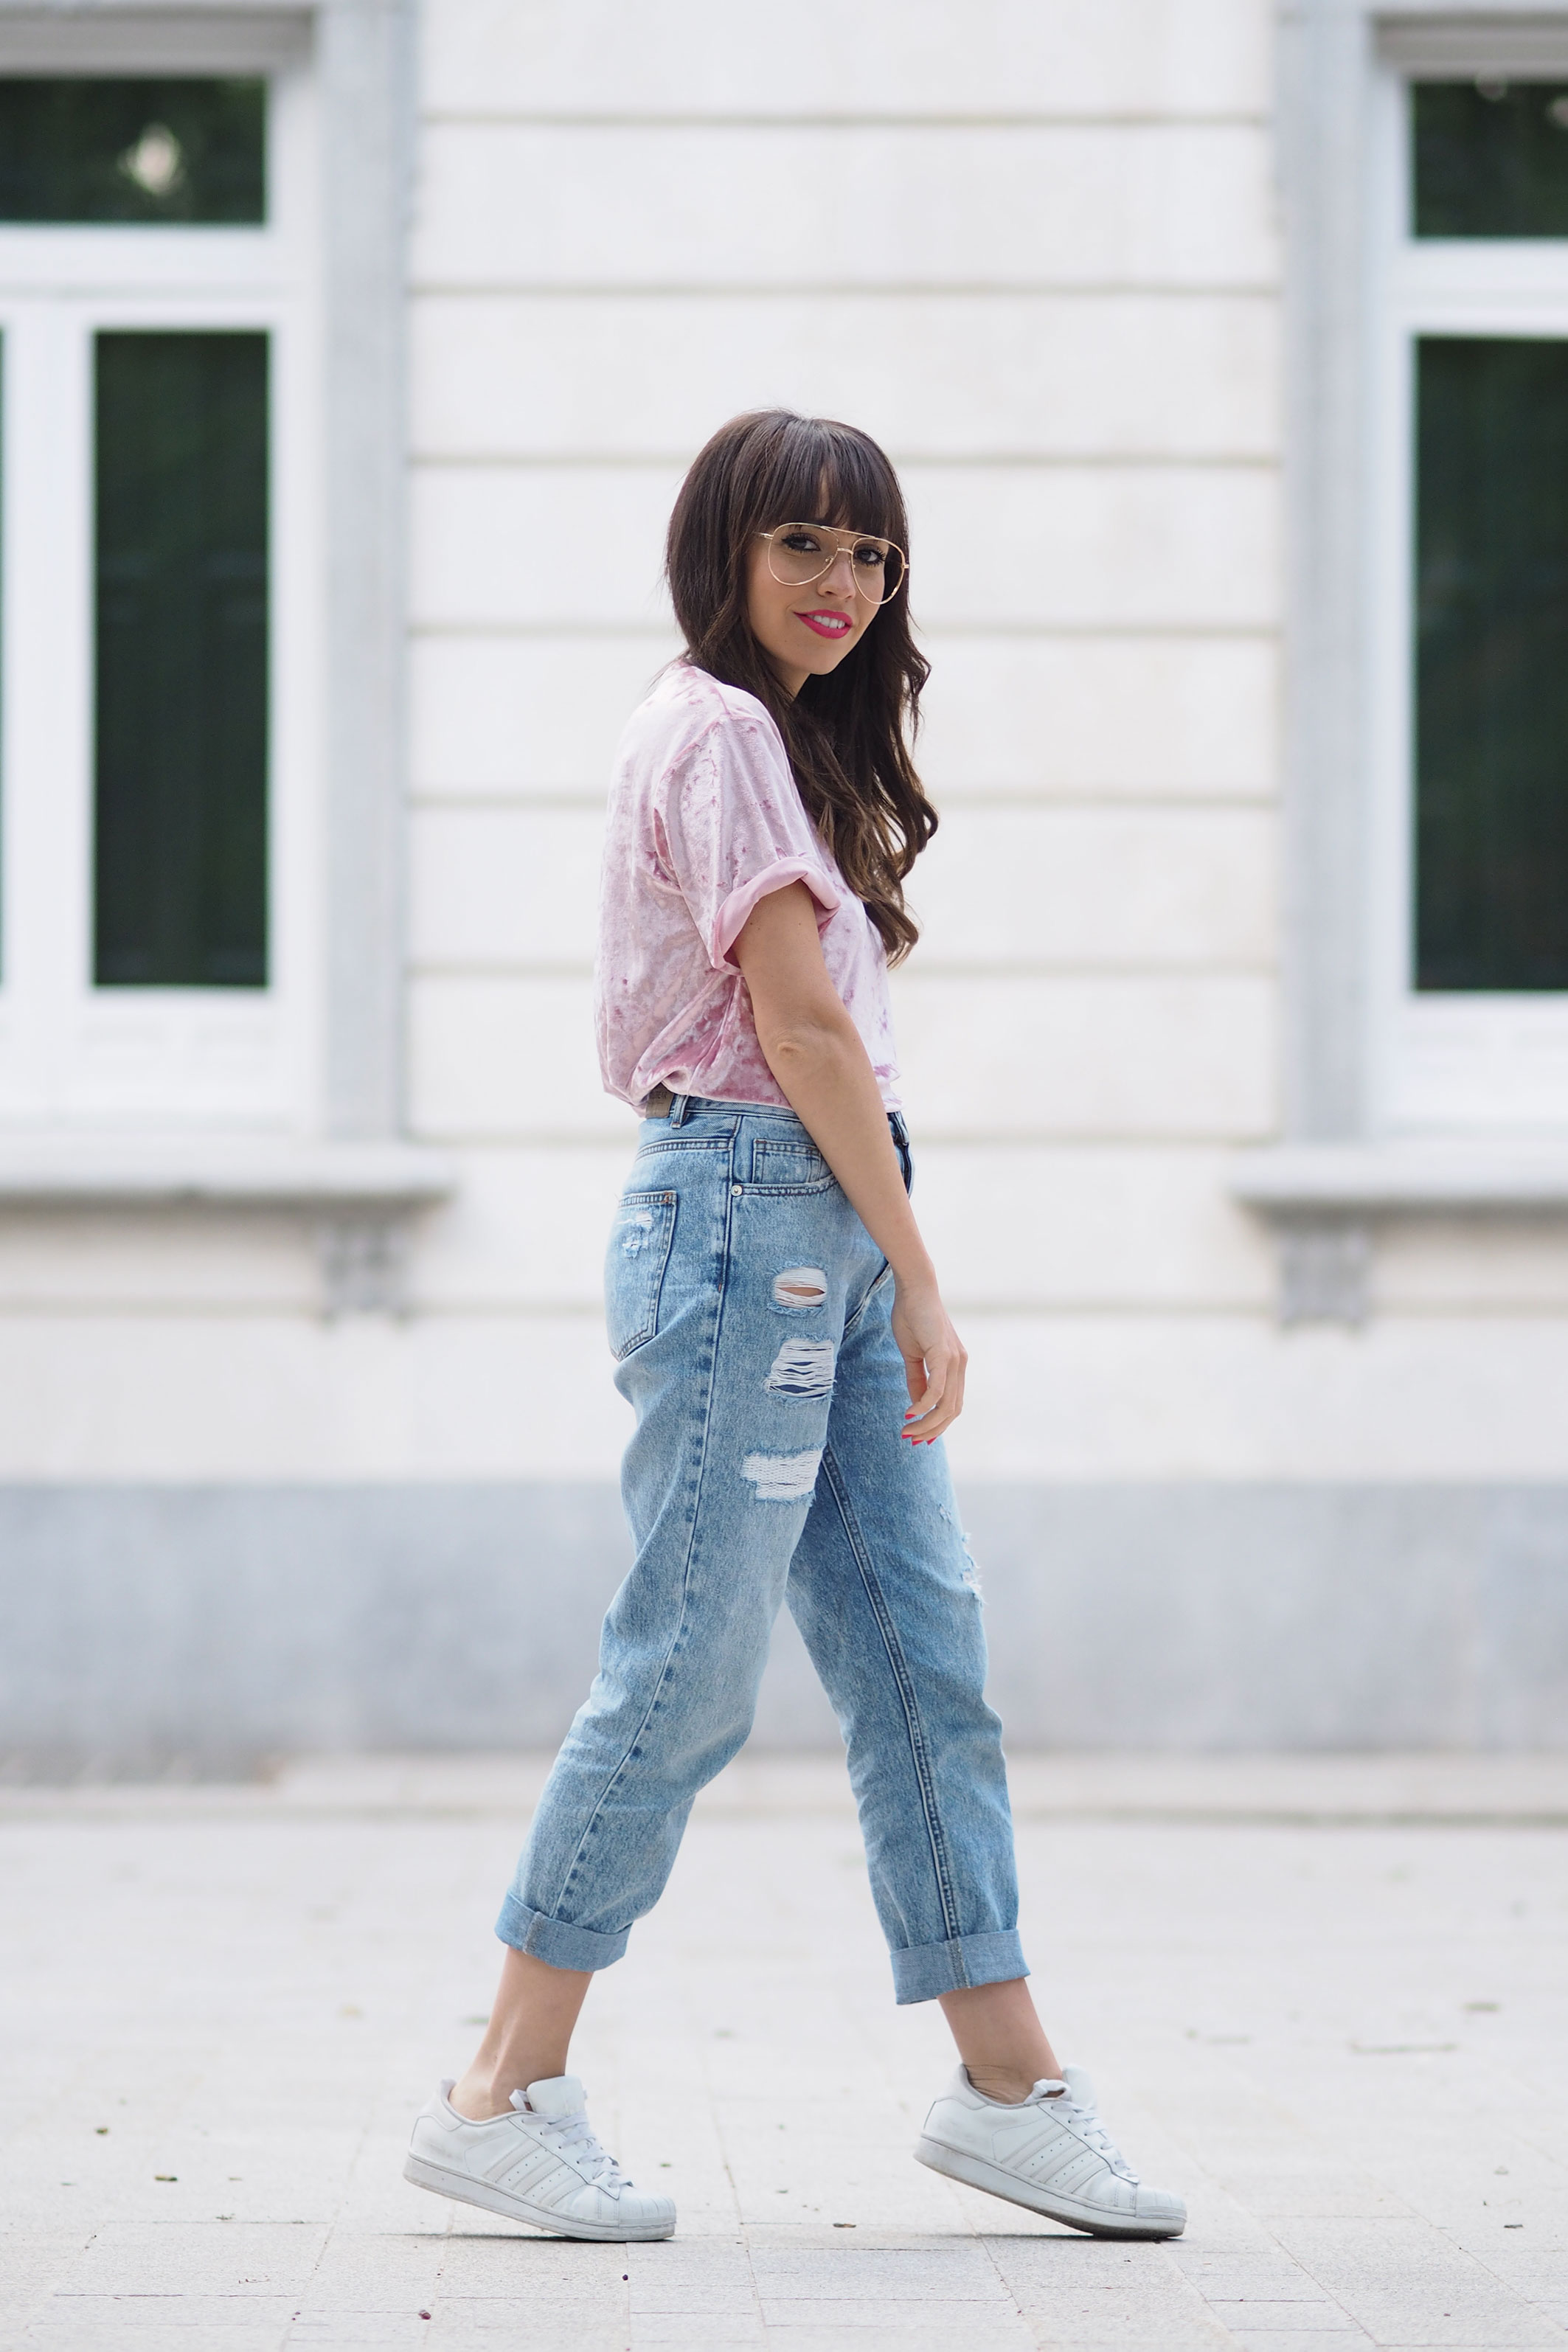 PINK VELVET TOP: SPRING OUTFIT